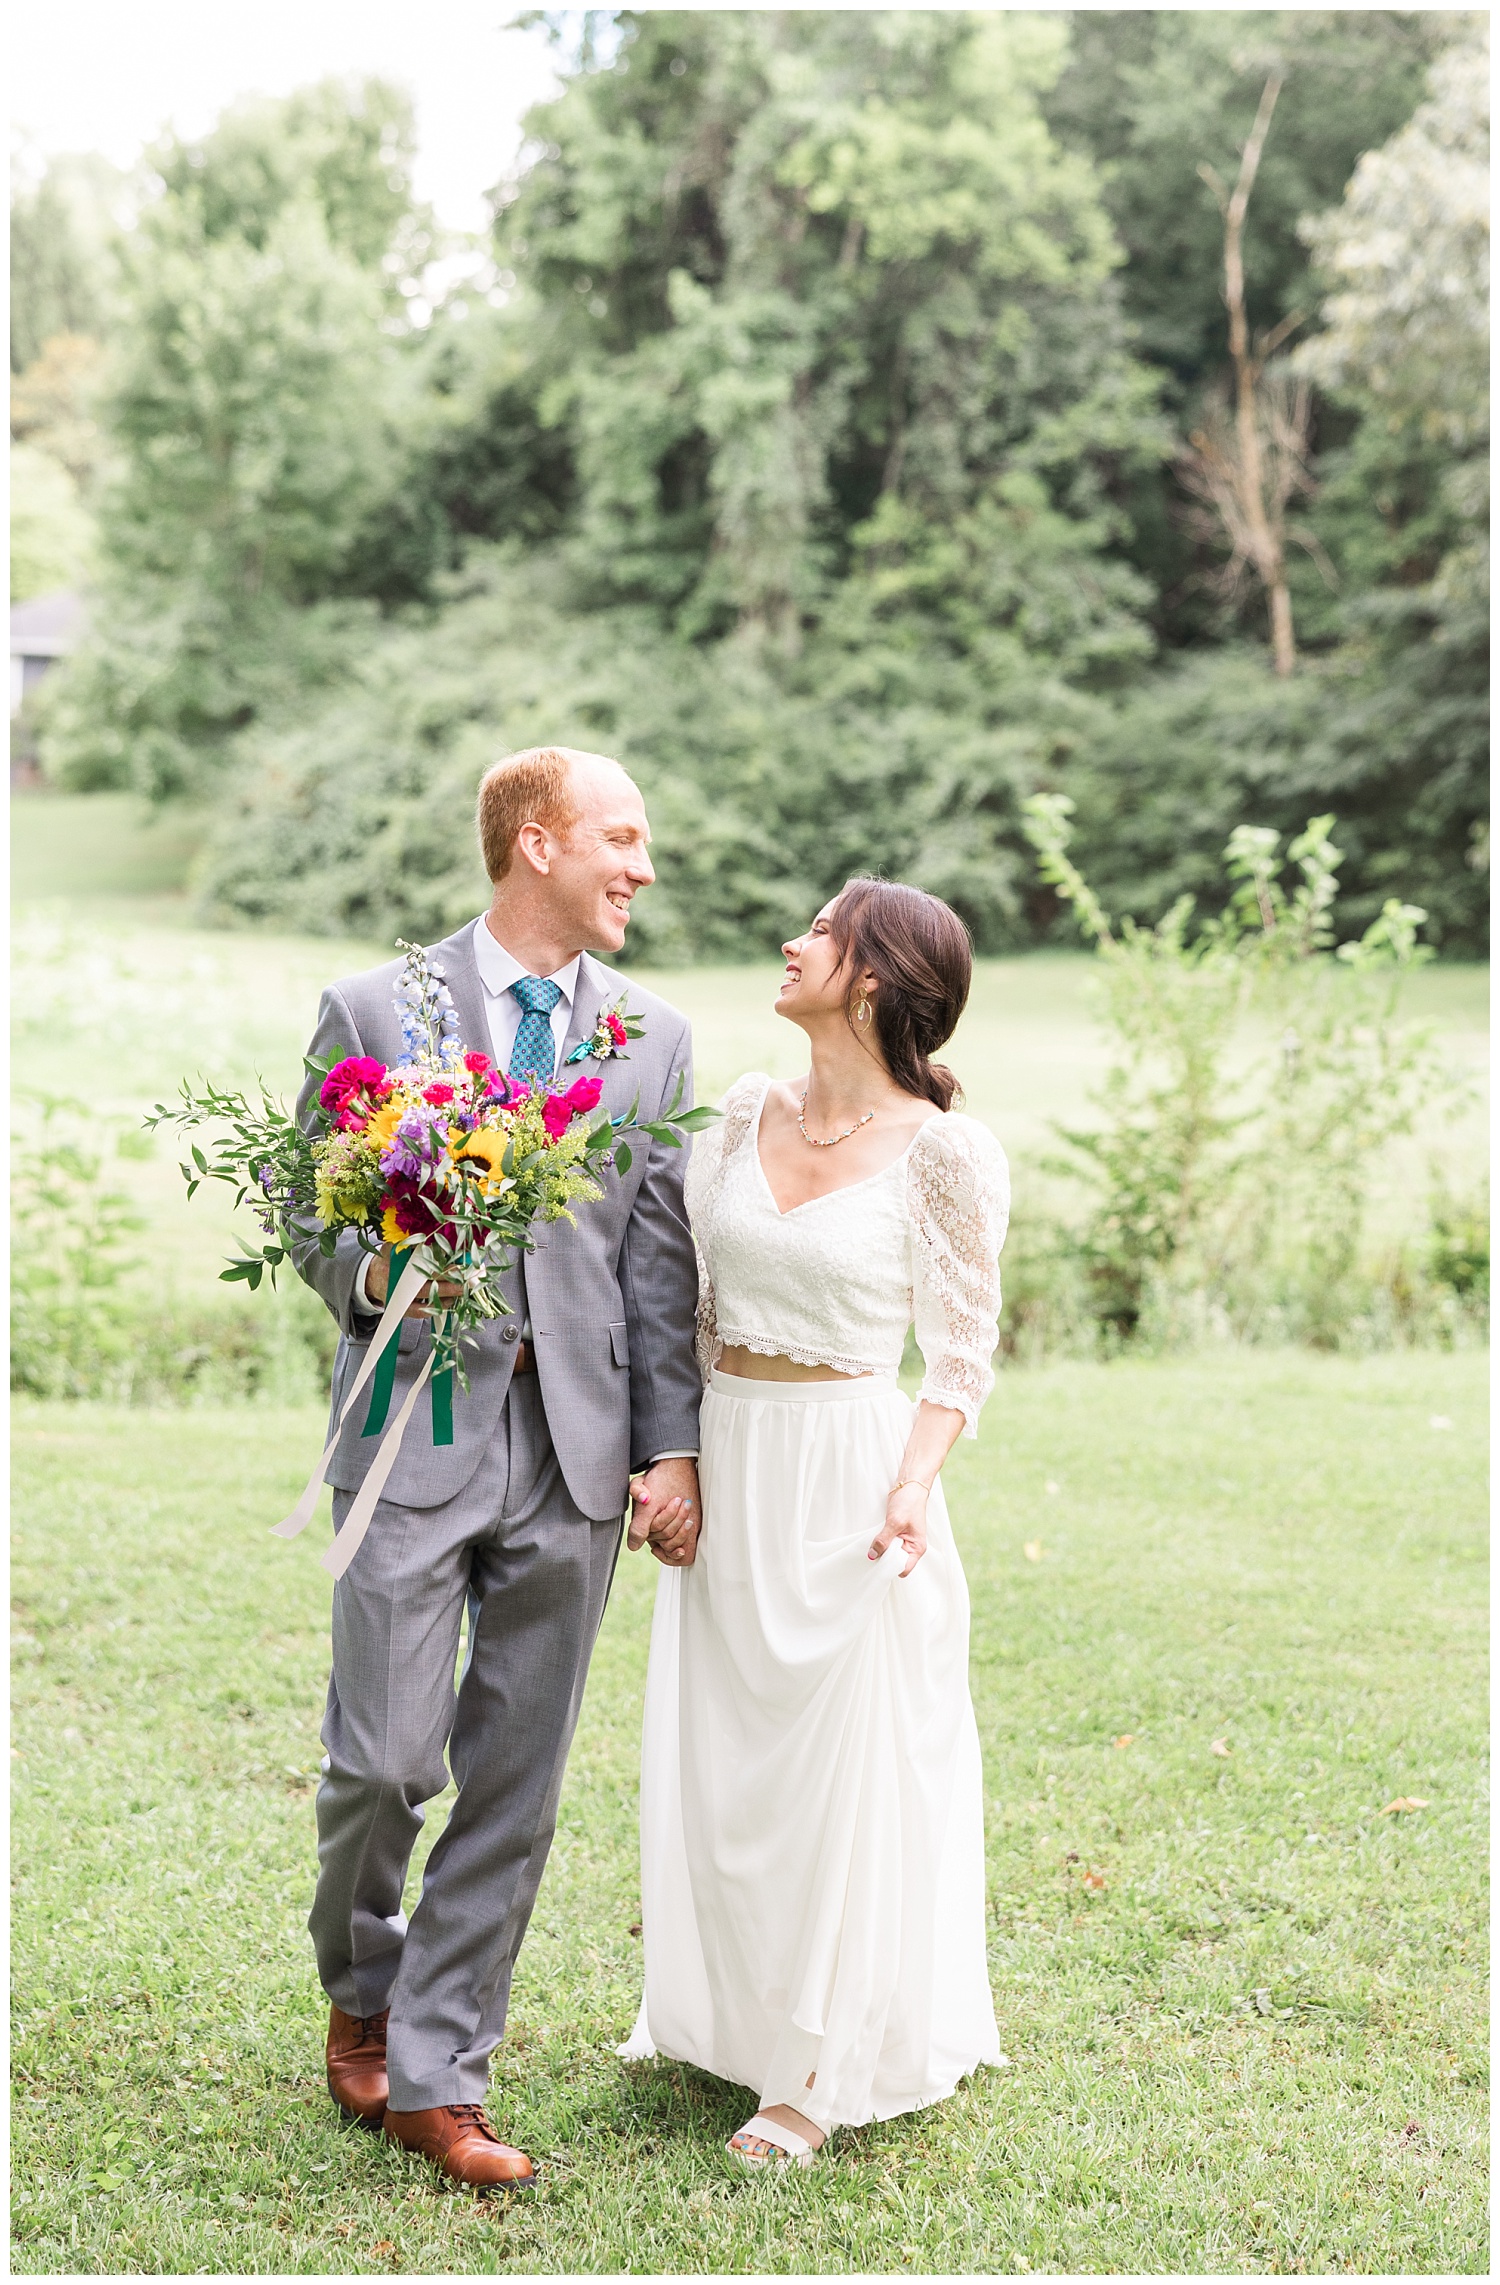 A colorful summer wedding in Chattanooga